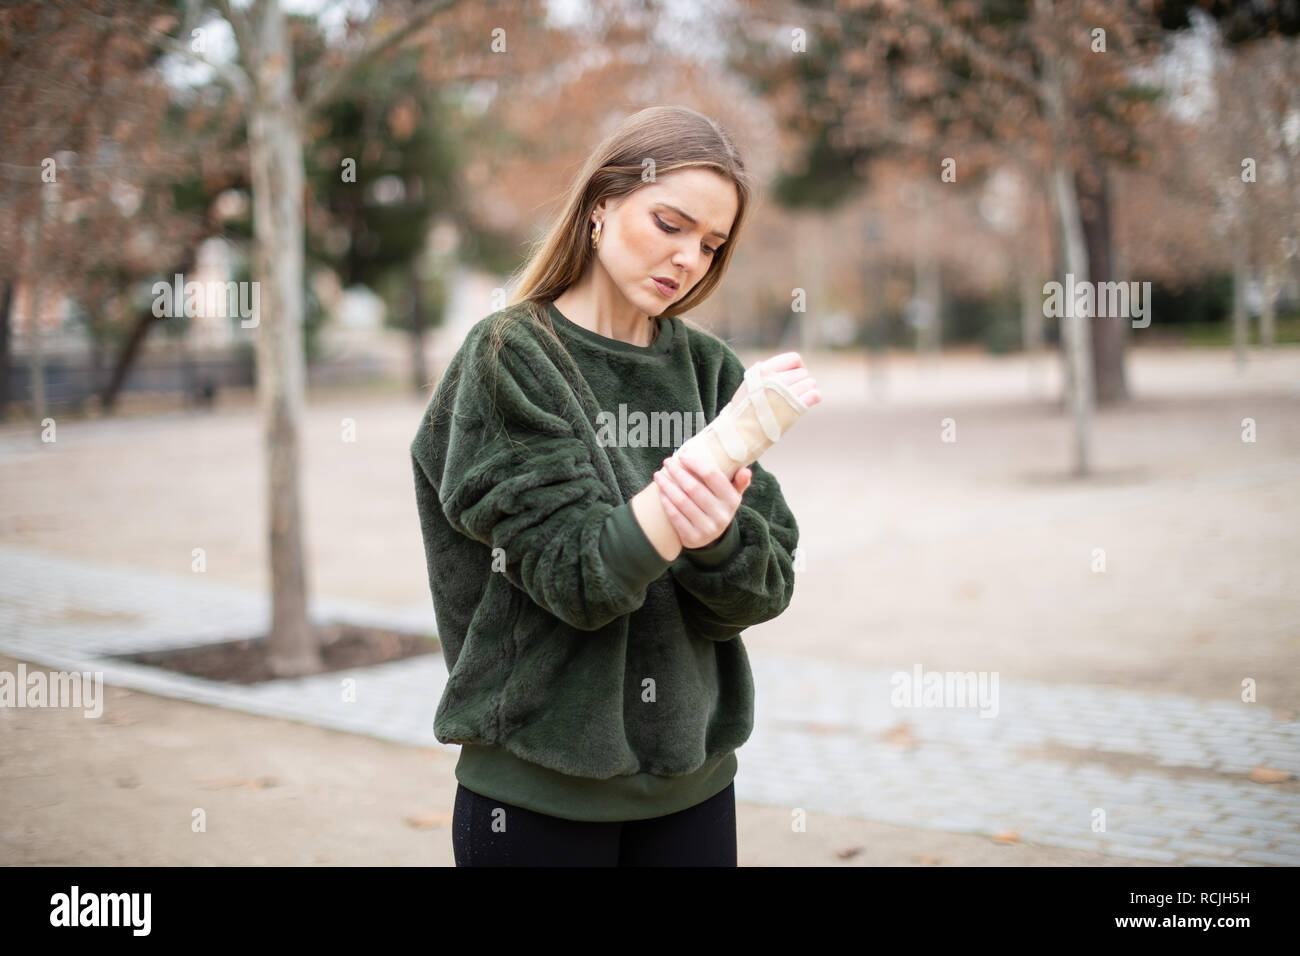 Beautiful young lady in stylish outfit frowning and touching bandage on injured arm while standing in autumn park Stock Photo